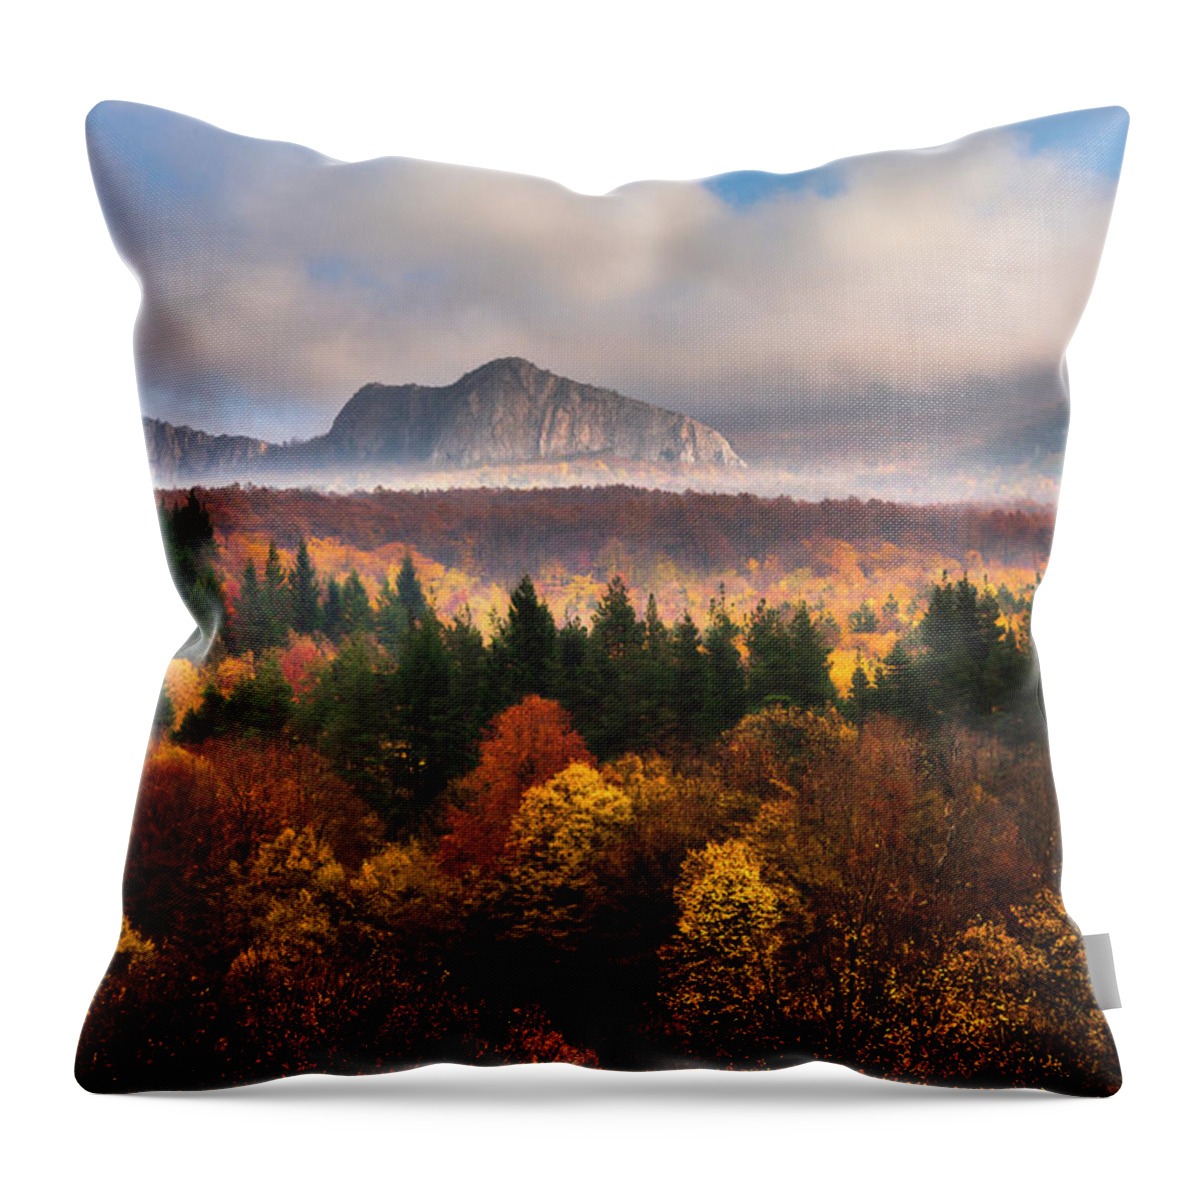 Balkan Mountains Throw Pillow featuring the photograph Land Of Illusion by Evgeni Dinev